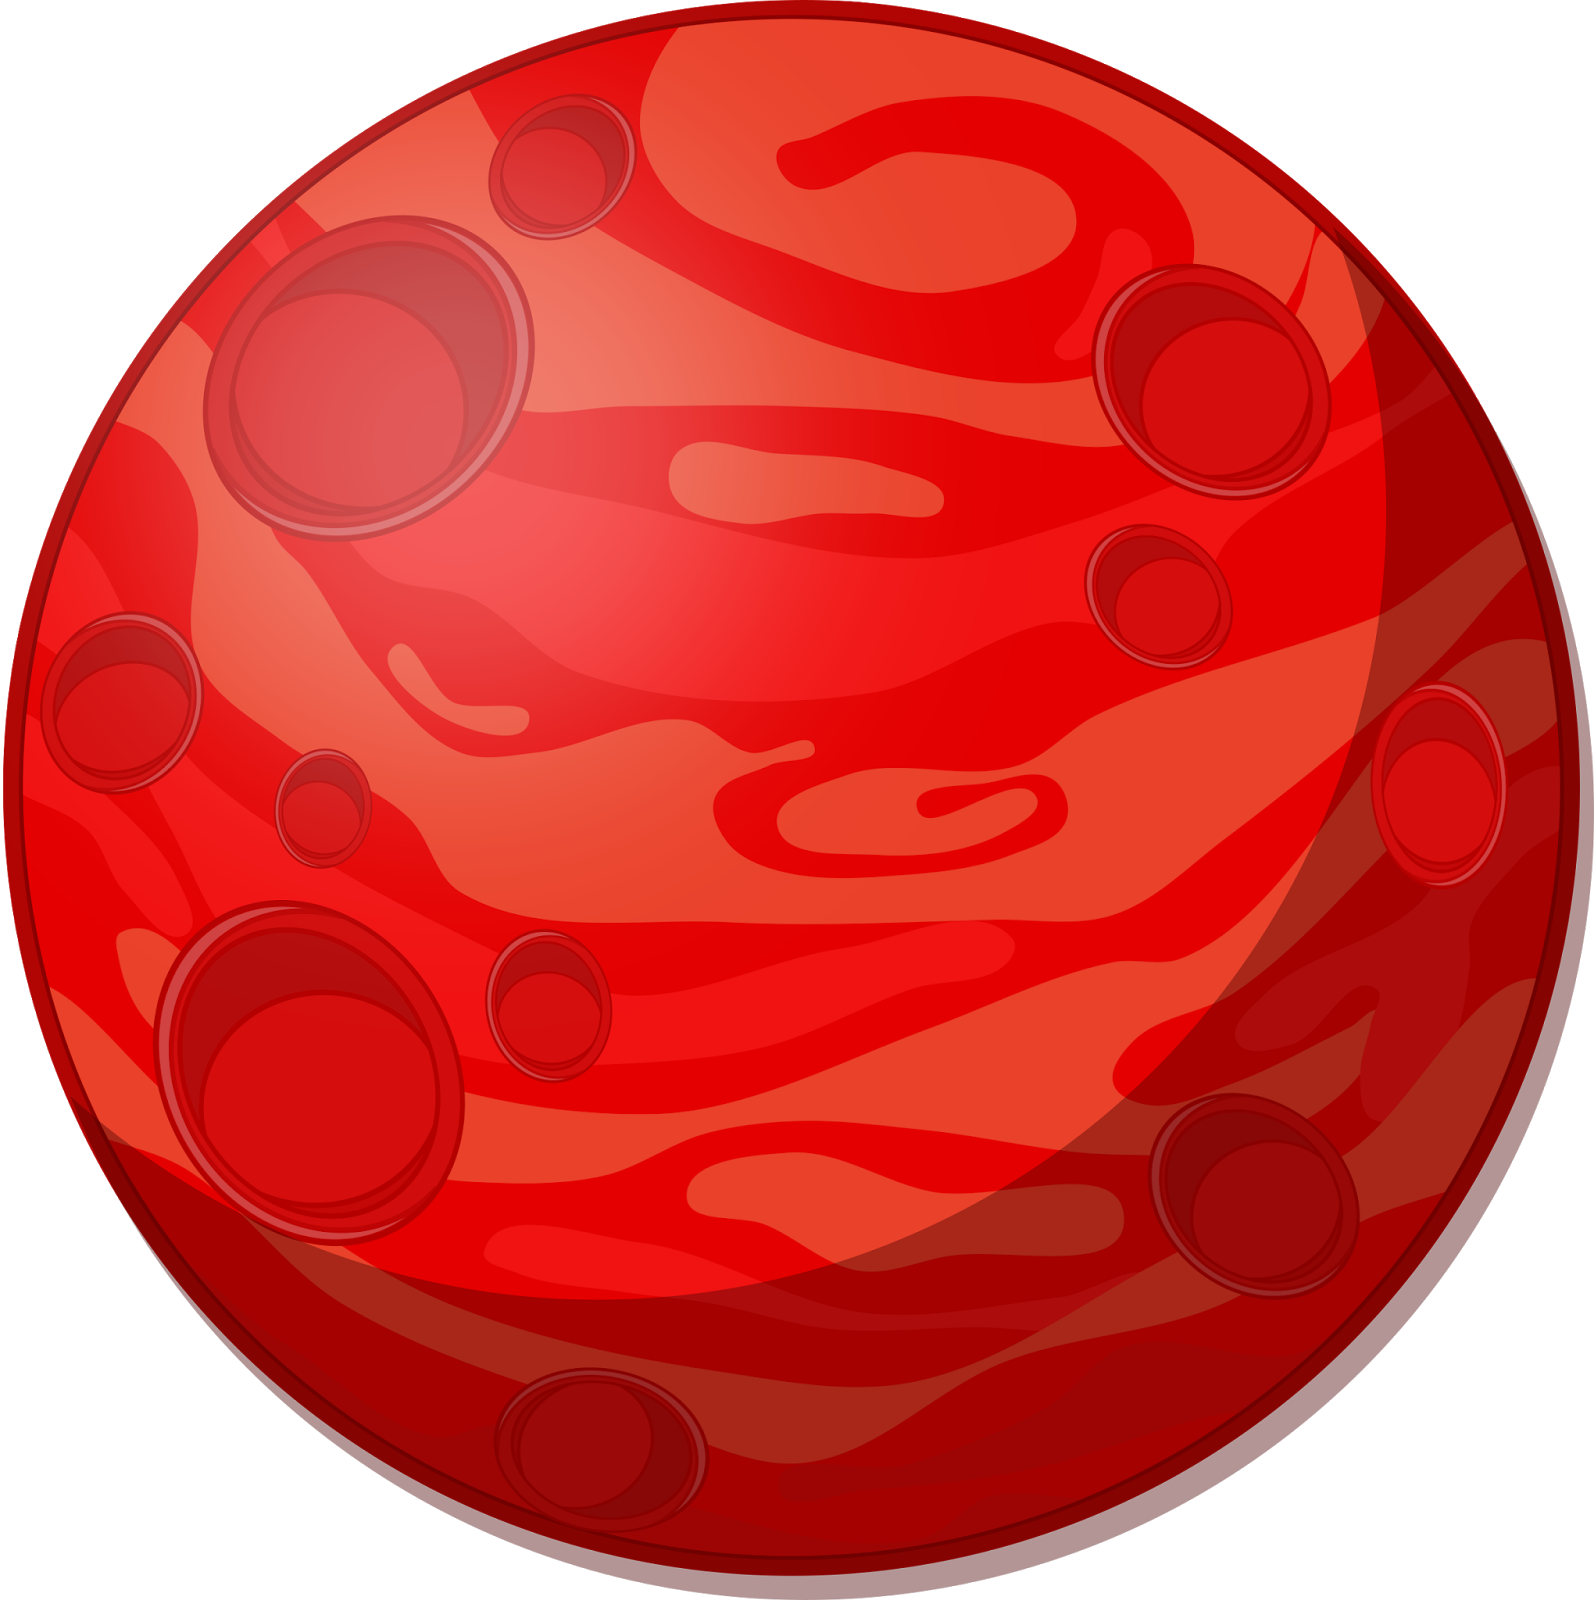 planeten clipart red moon